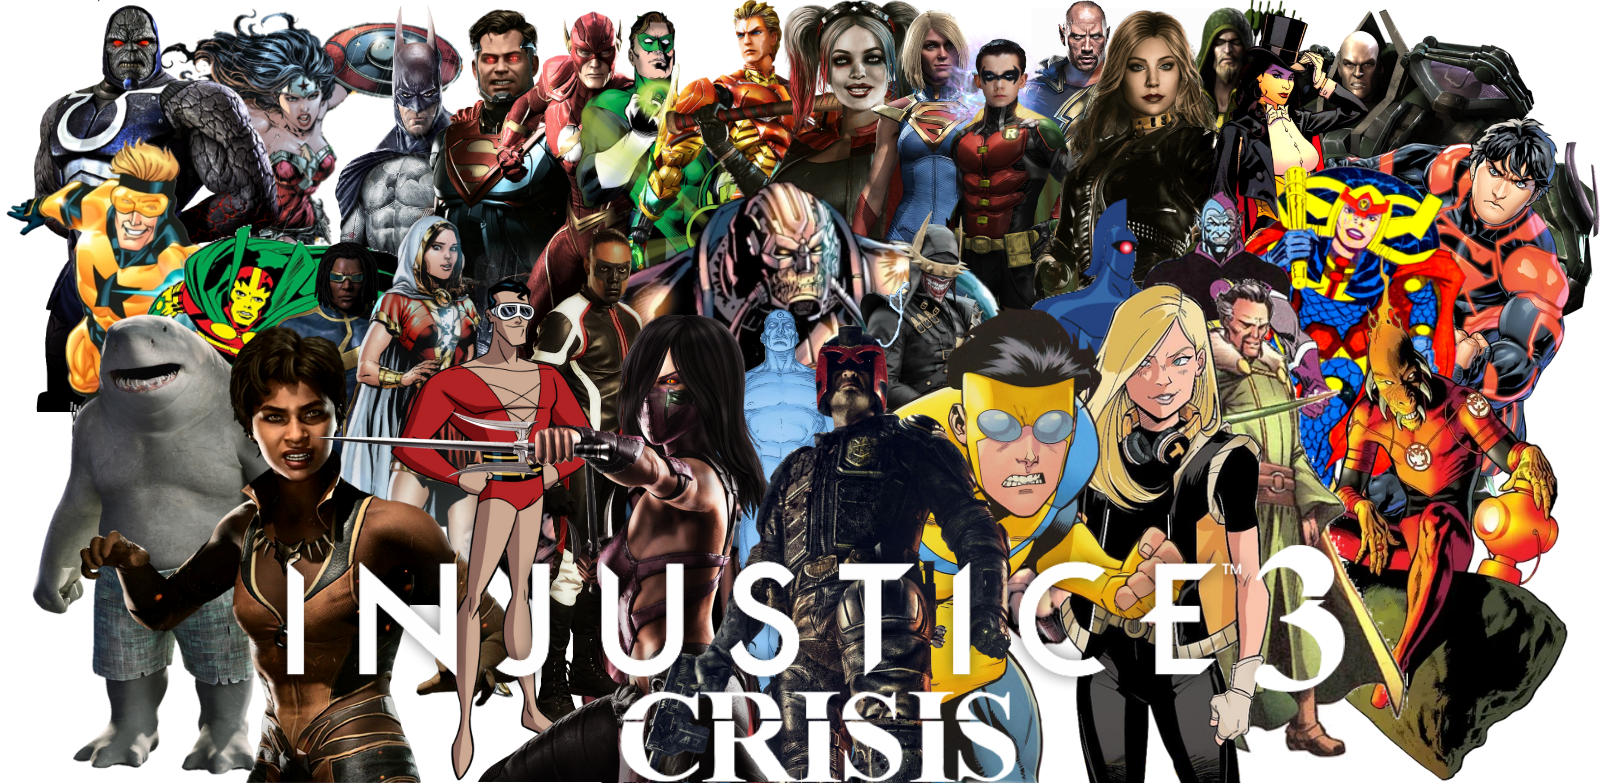 Who do you want to see in a future version of Injustice 3?